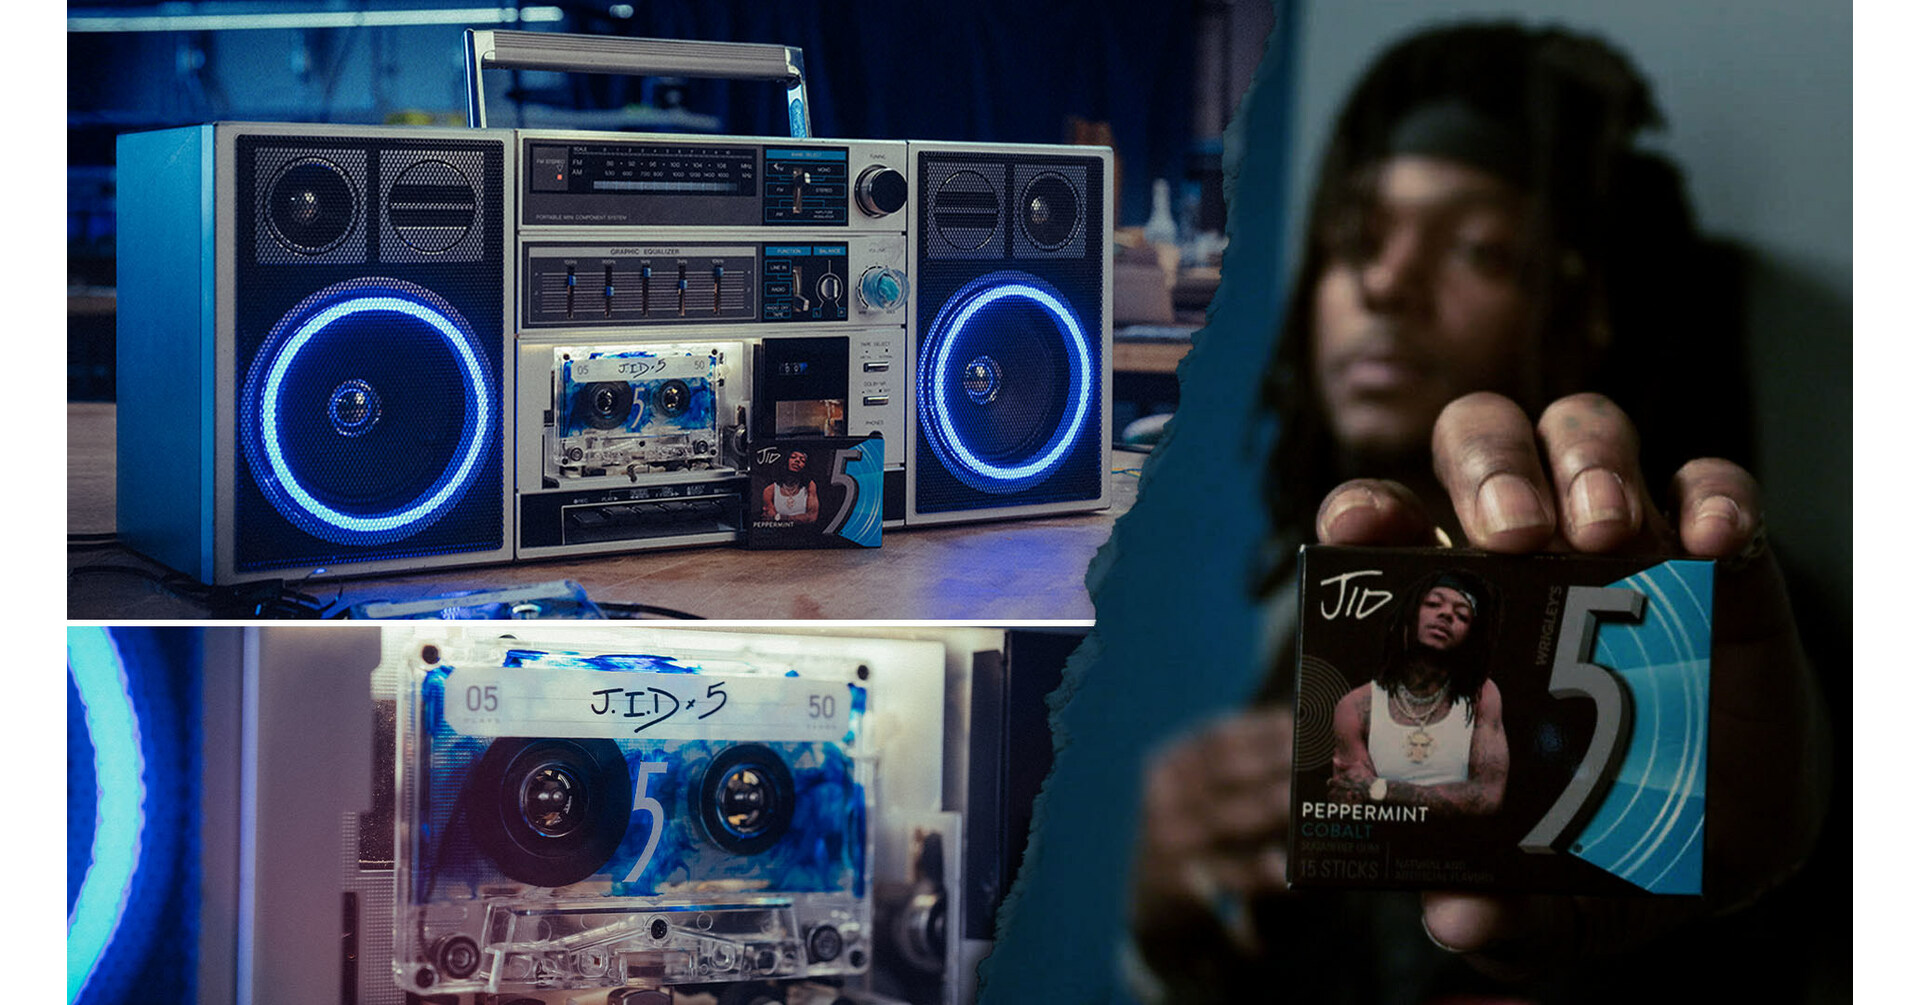 5 Gum® Teams Up With J.I.D to Release Exclusive Track Available on Only 5  Boomboxes in the World in Celebration of the 50th Anniversary of Hip Hop